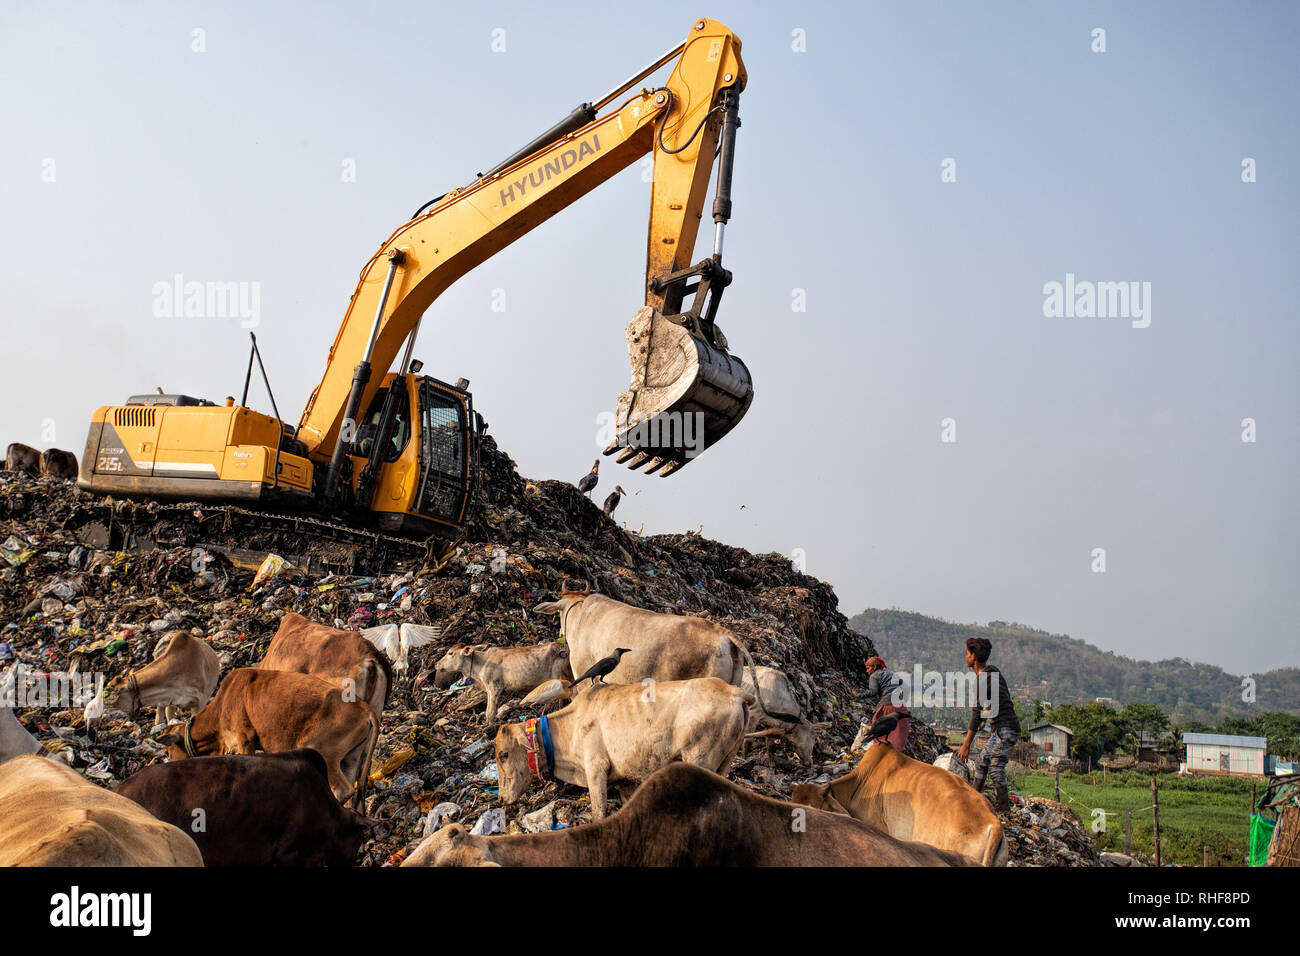 An excavator moves garbage at dump amongst cattle and greater adjutant storks Stock Photo